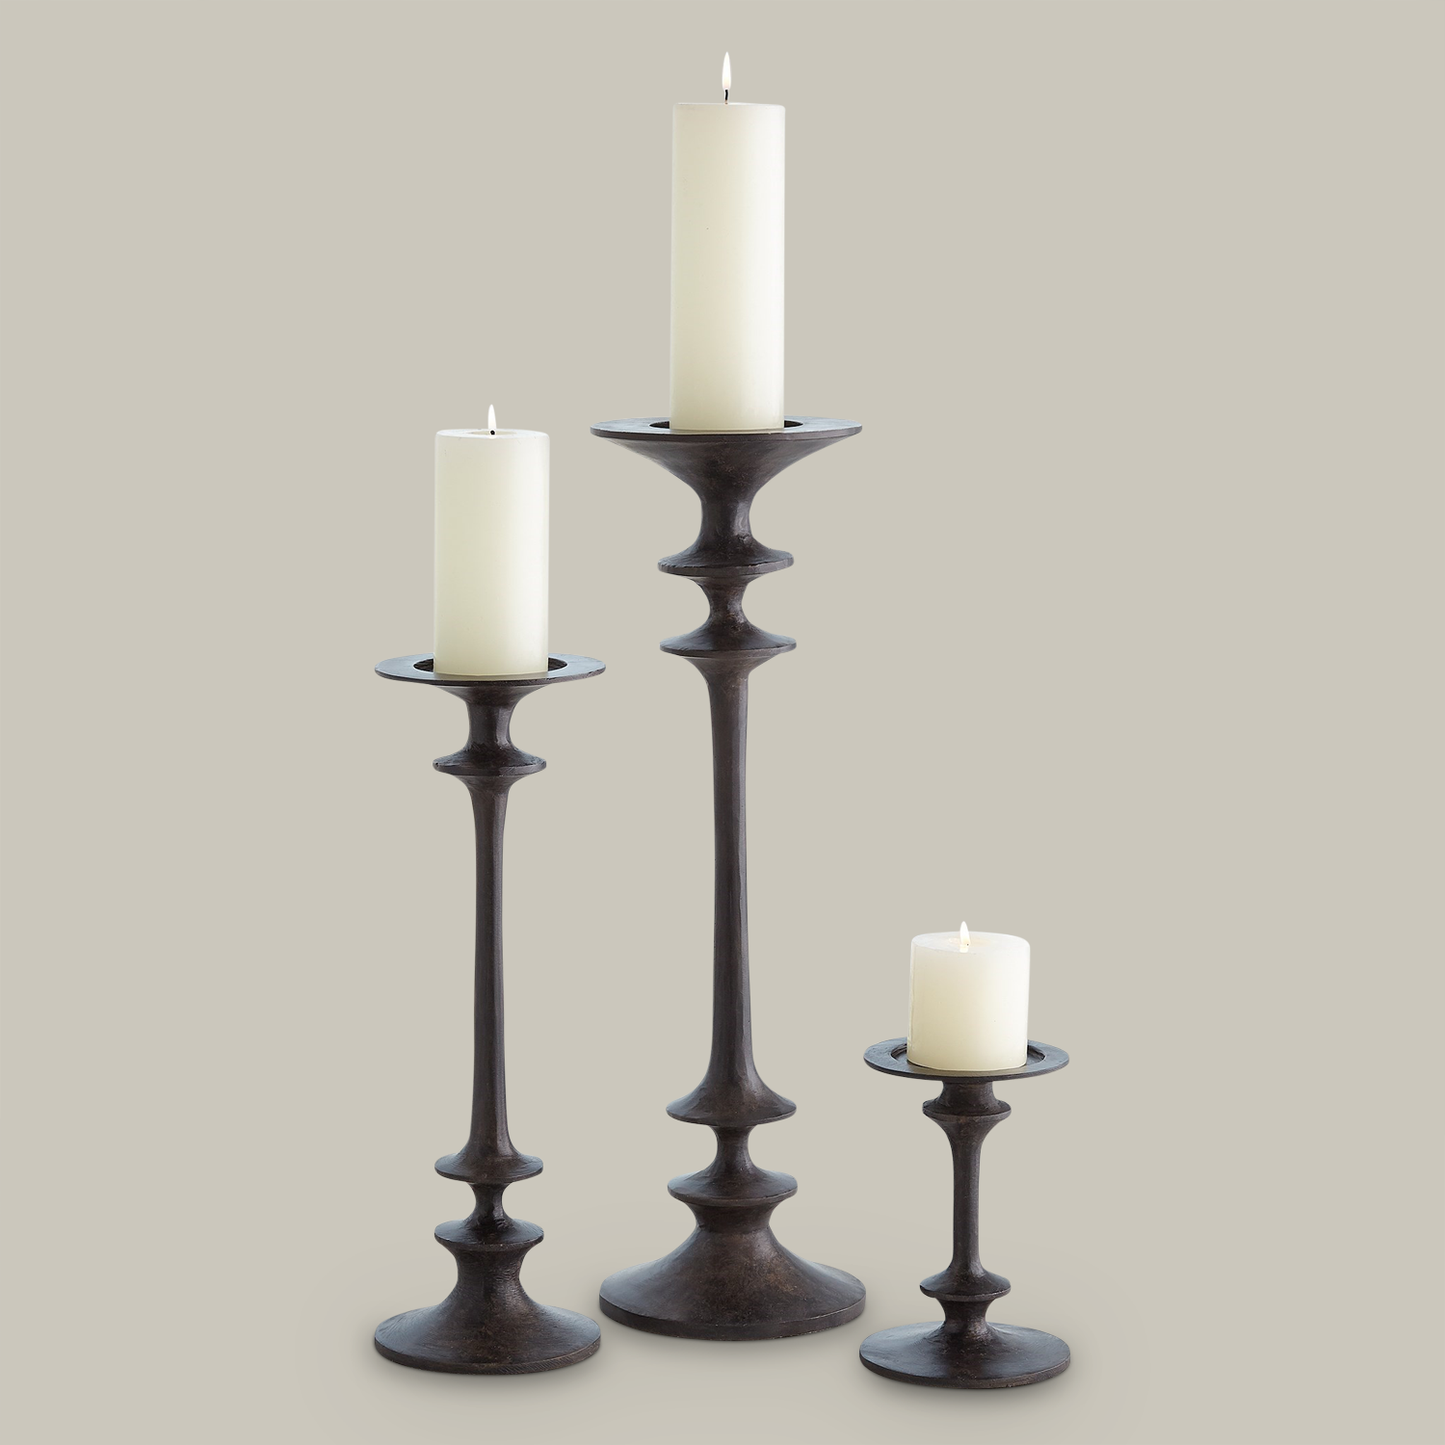 THÉOPHILE CANDLE HOLDER COLLECTION - Preorder